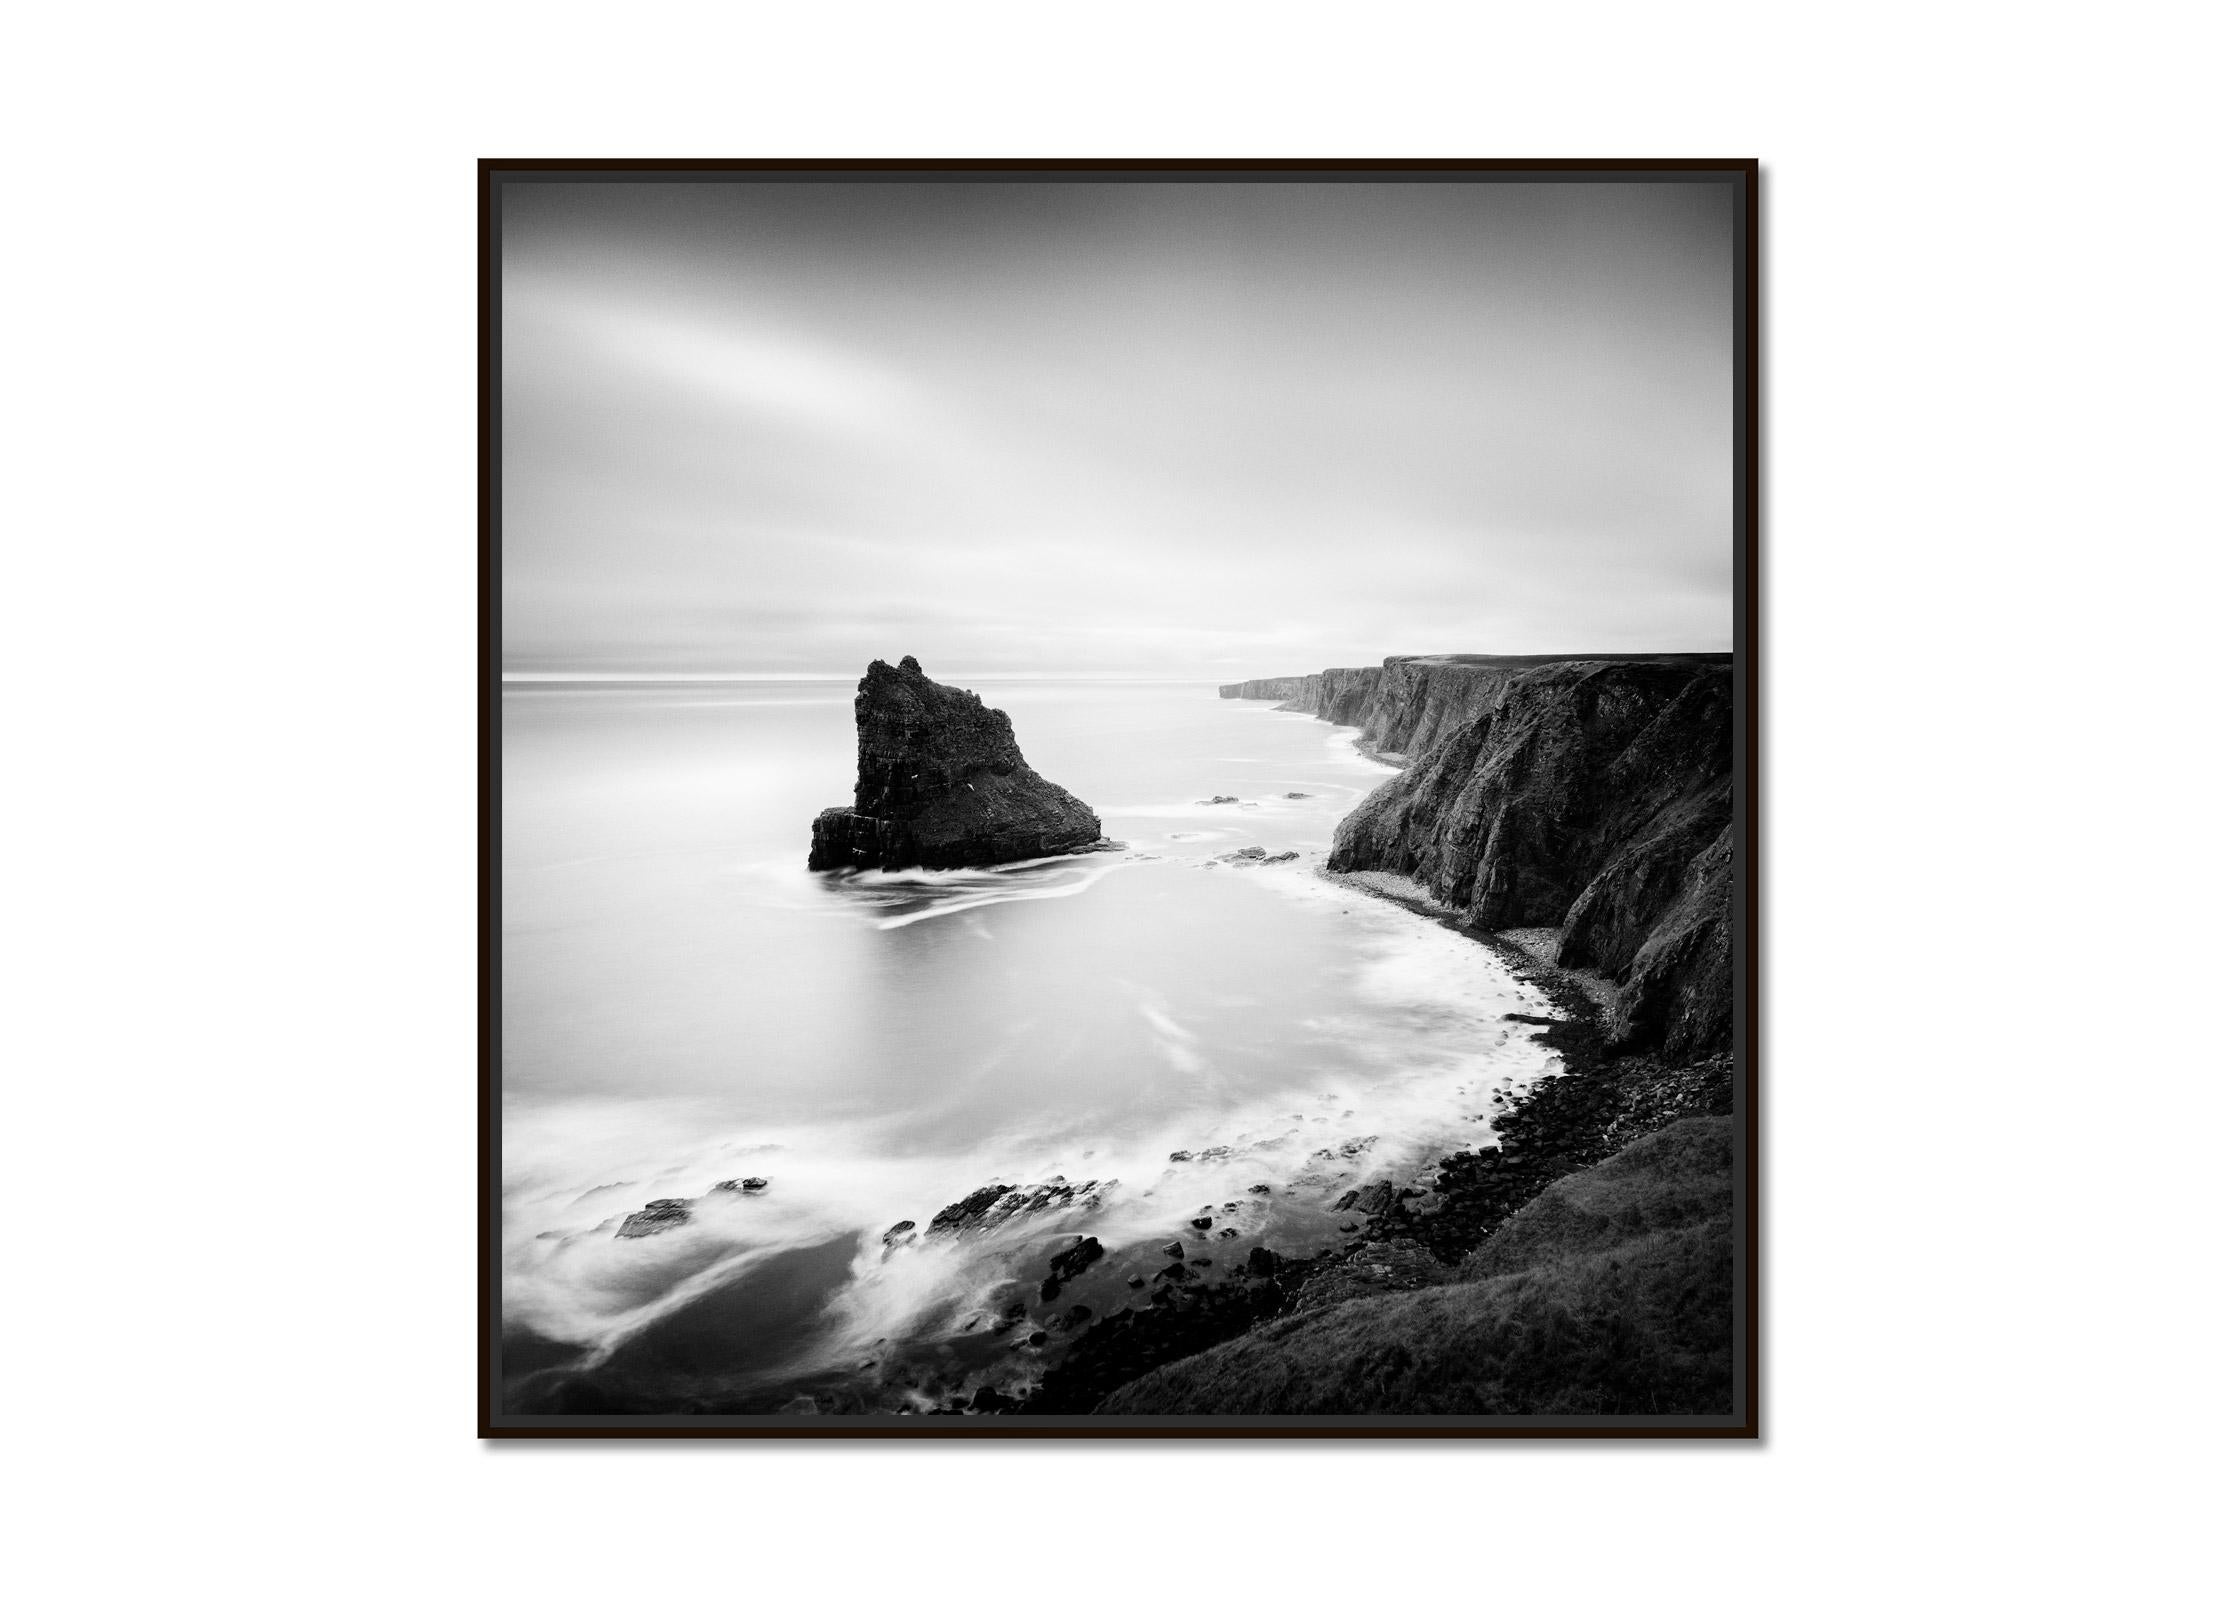 Surreal Moment, Cliff, Island, Scotland, black and white photography, landscape - Photograph by Gerald Berghammer